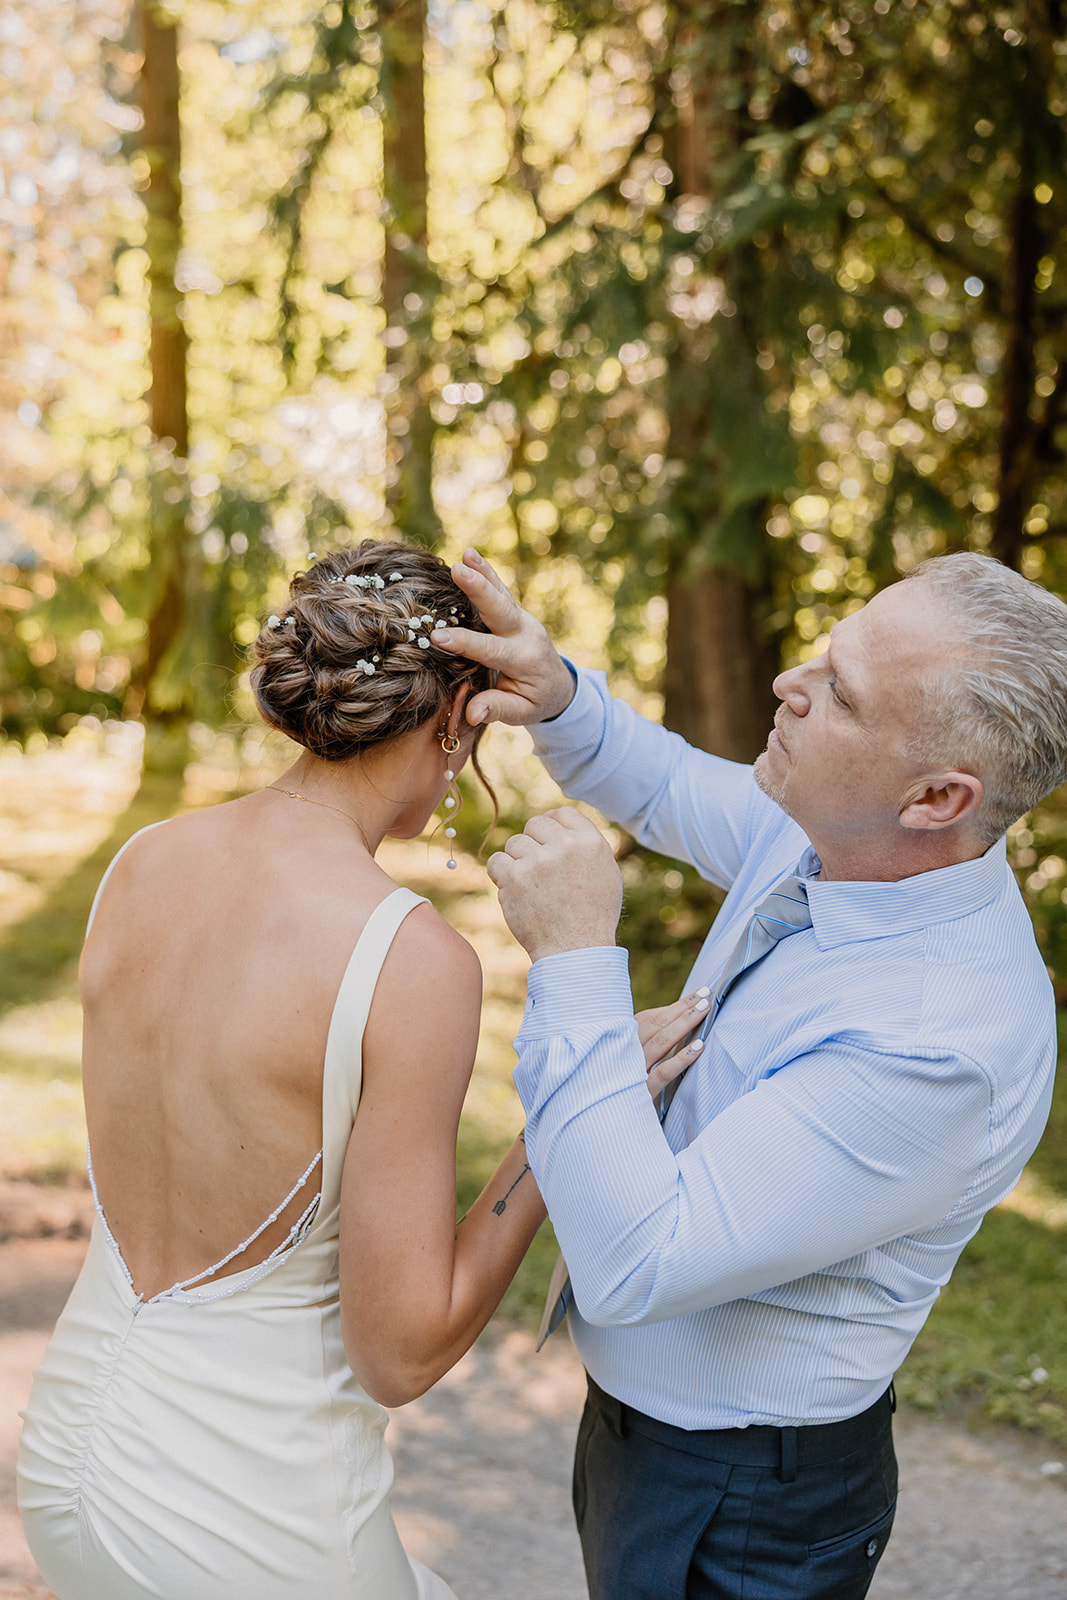 brides father fixing her hair on her wedding day Camp Colton - A Mystical Oregon Wedding Venue